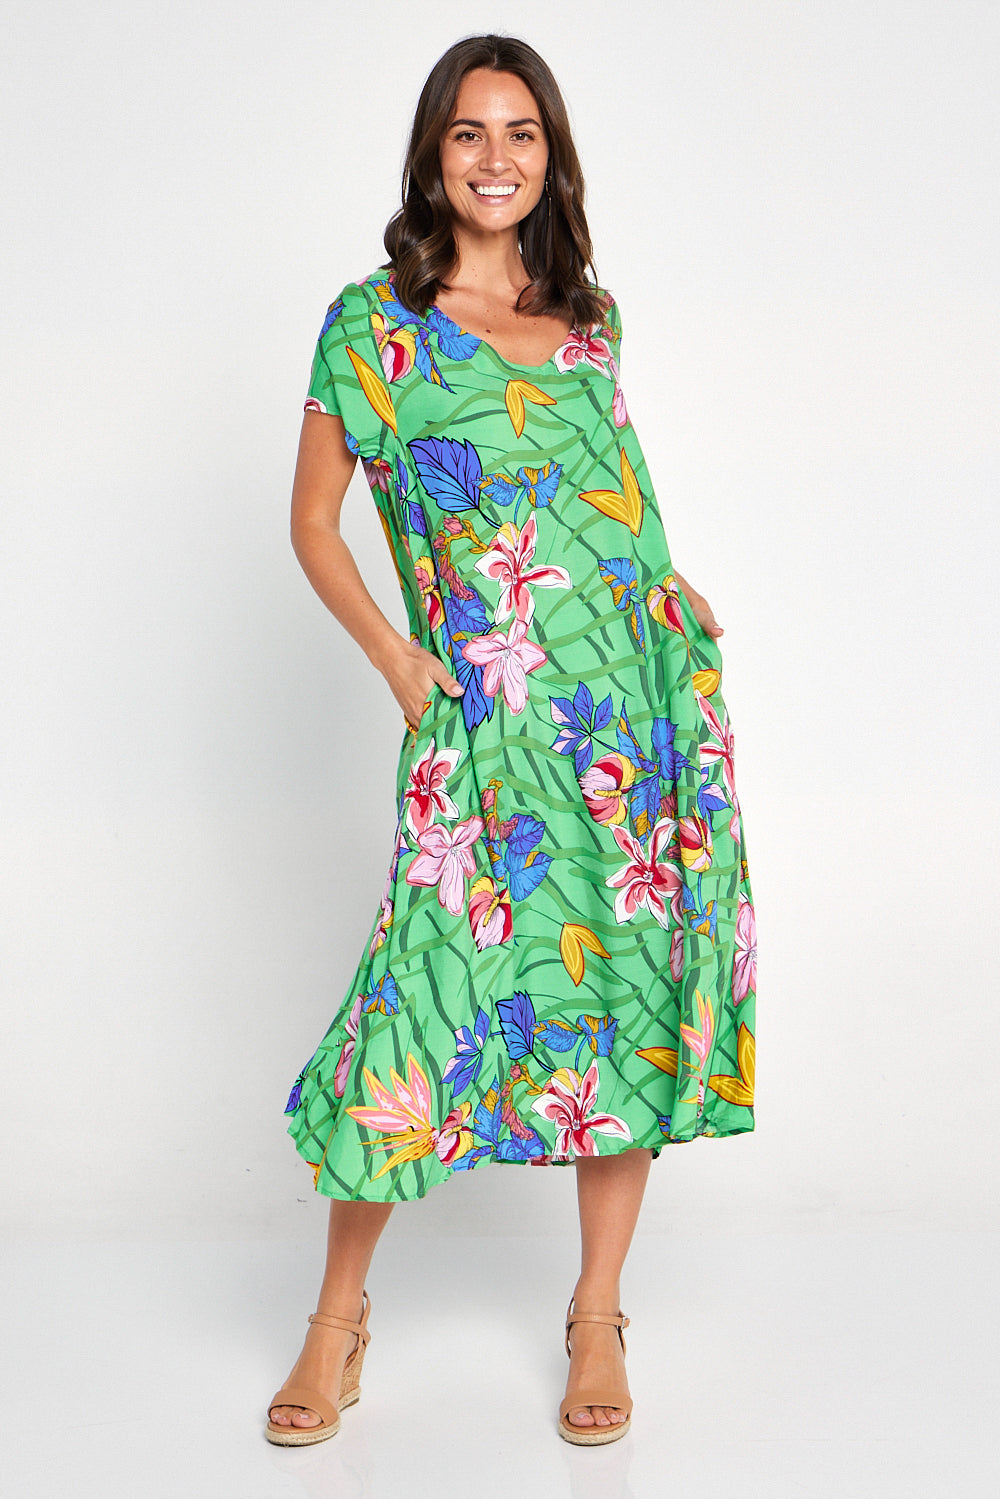 Image of Maeve Dress - Green Floral